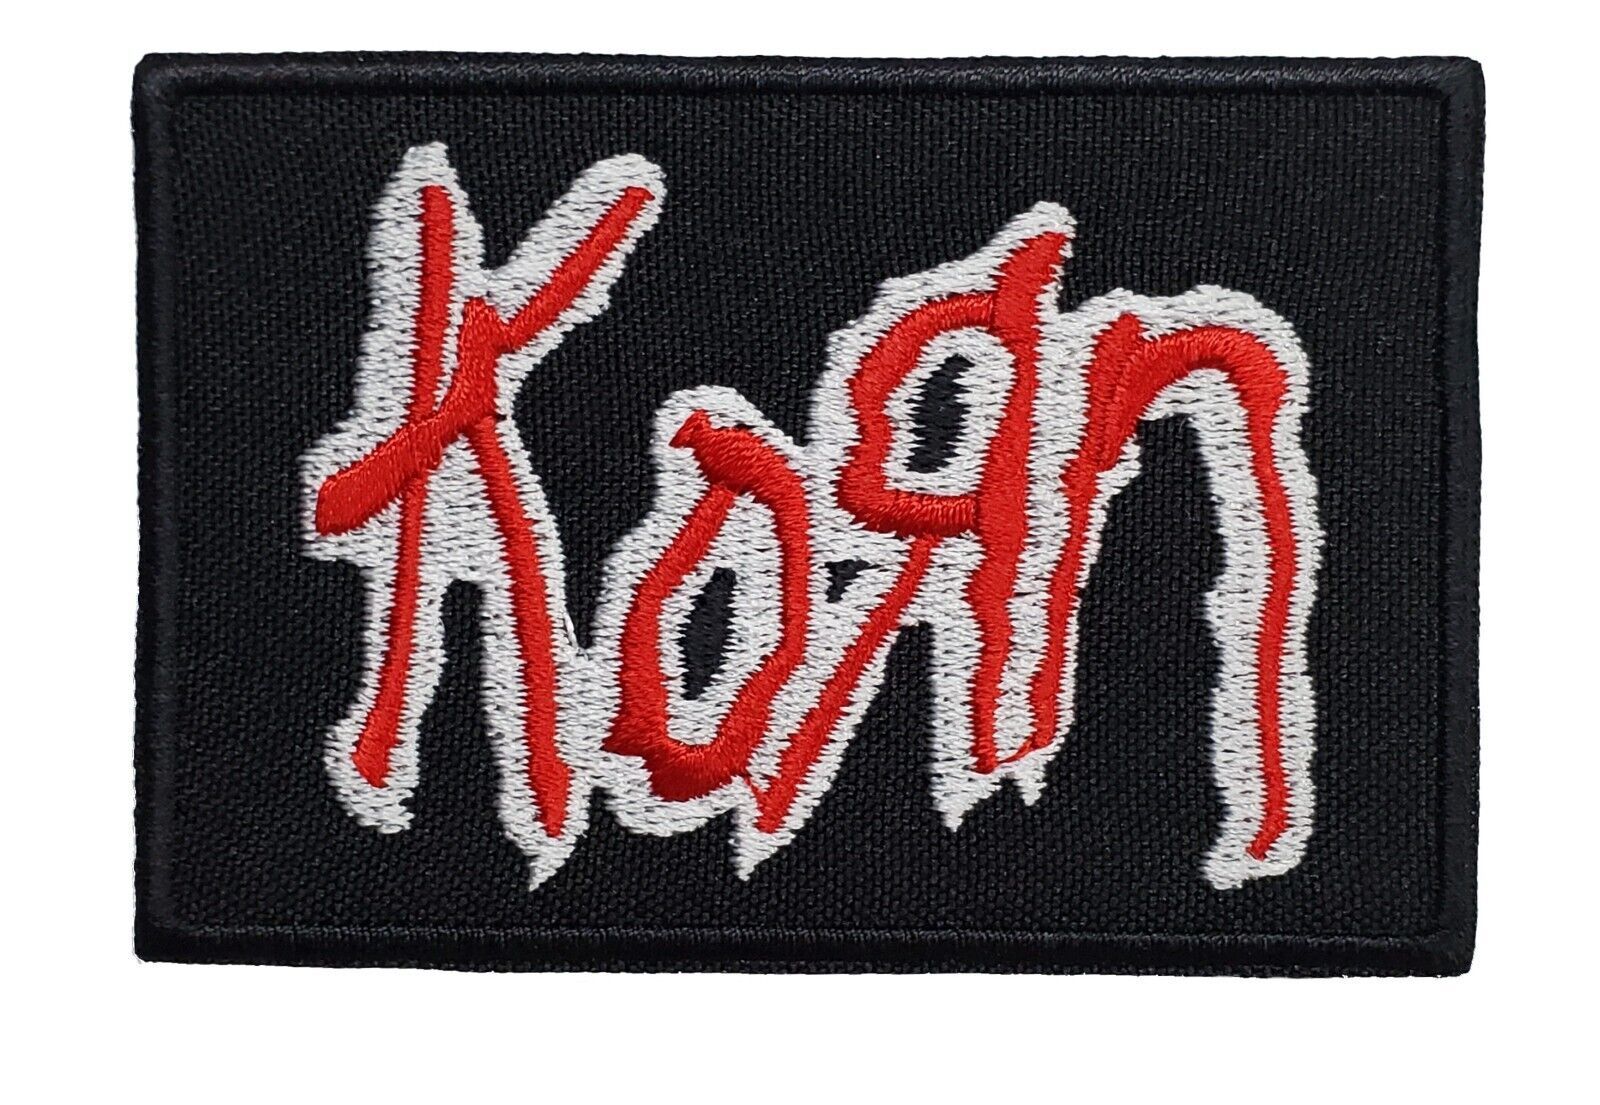 Korn Music Band Rock and Roll Embroidered Iron On Patch 3" x 2" Jonathan Davis - $6.49 - $8.49